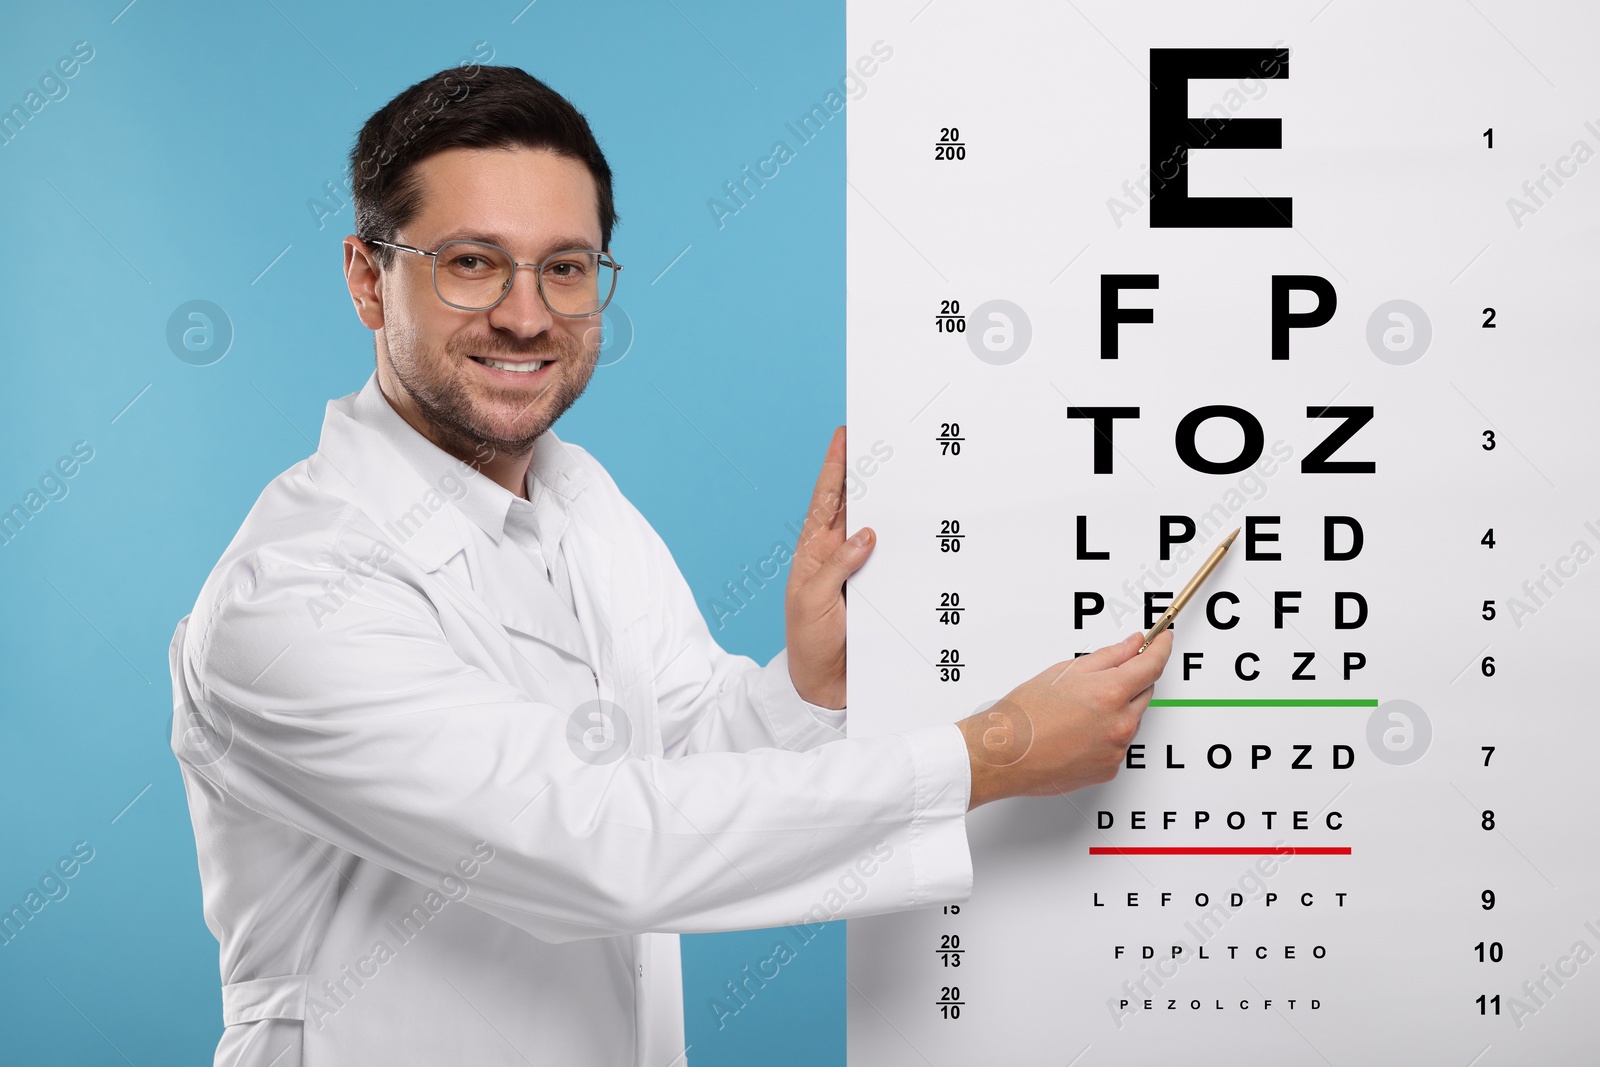 Image of Ophthalmologist pointing at vision test chart on light blue background